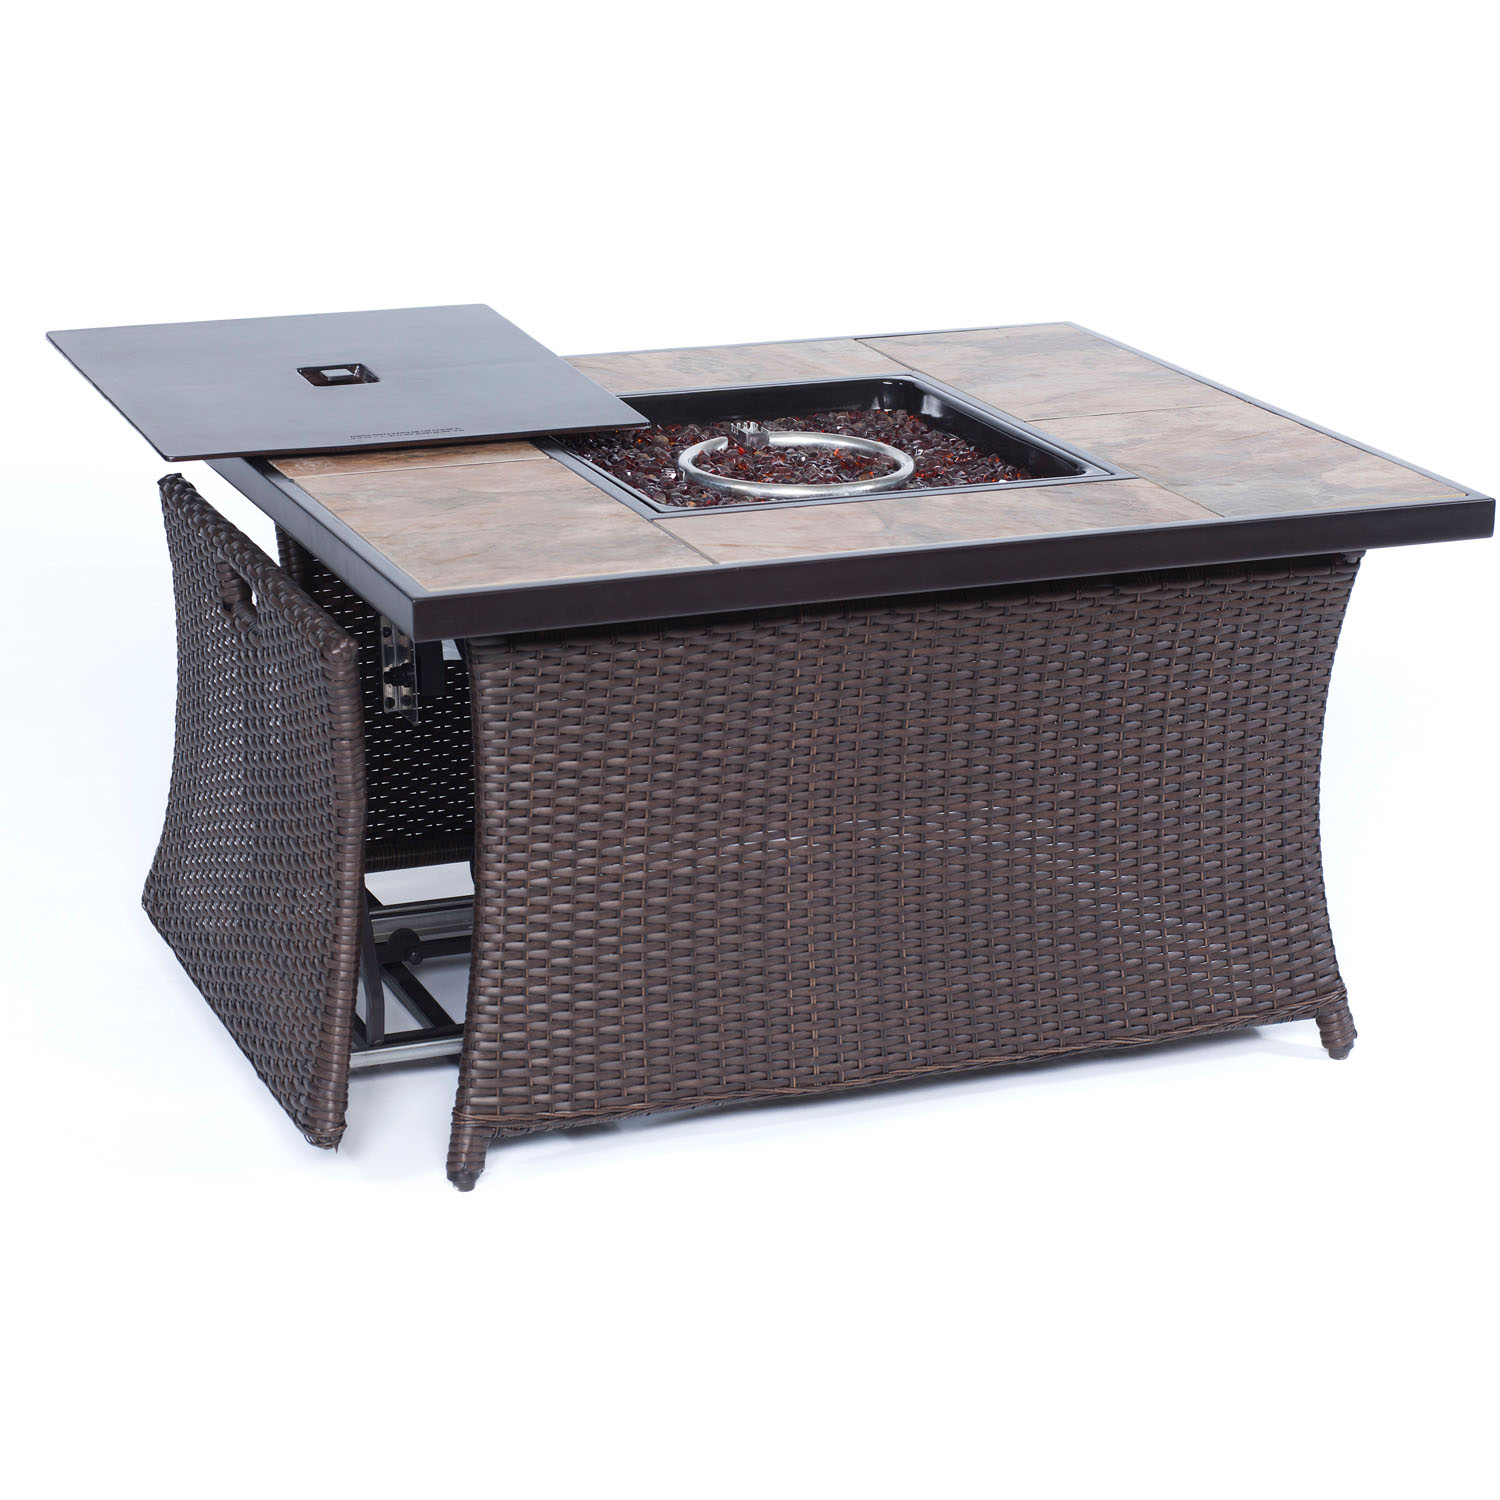 Hanover Hudson Square 4-Piece Fire Pit Lounge Set with Faux-Stone Tile Top - image 4 of 12